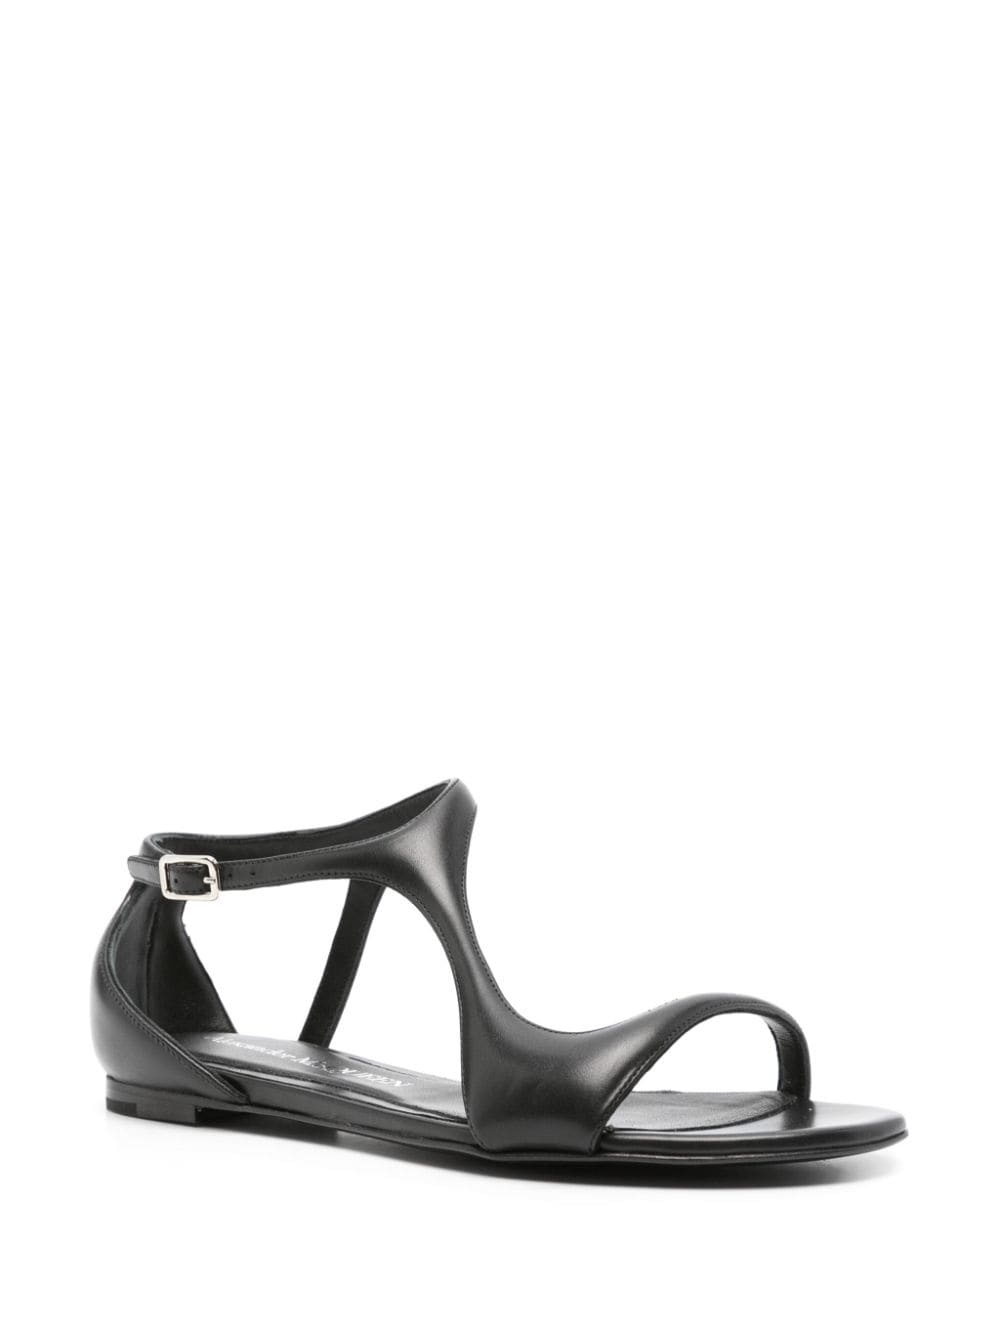 leather flat sandals - 2